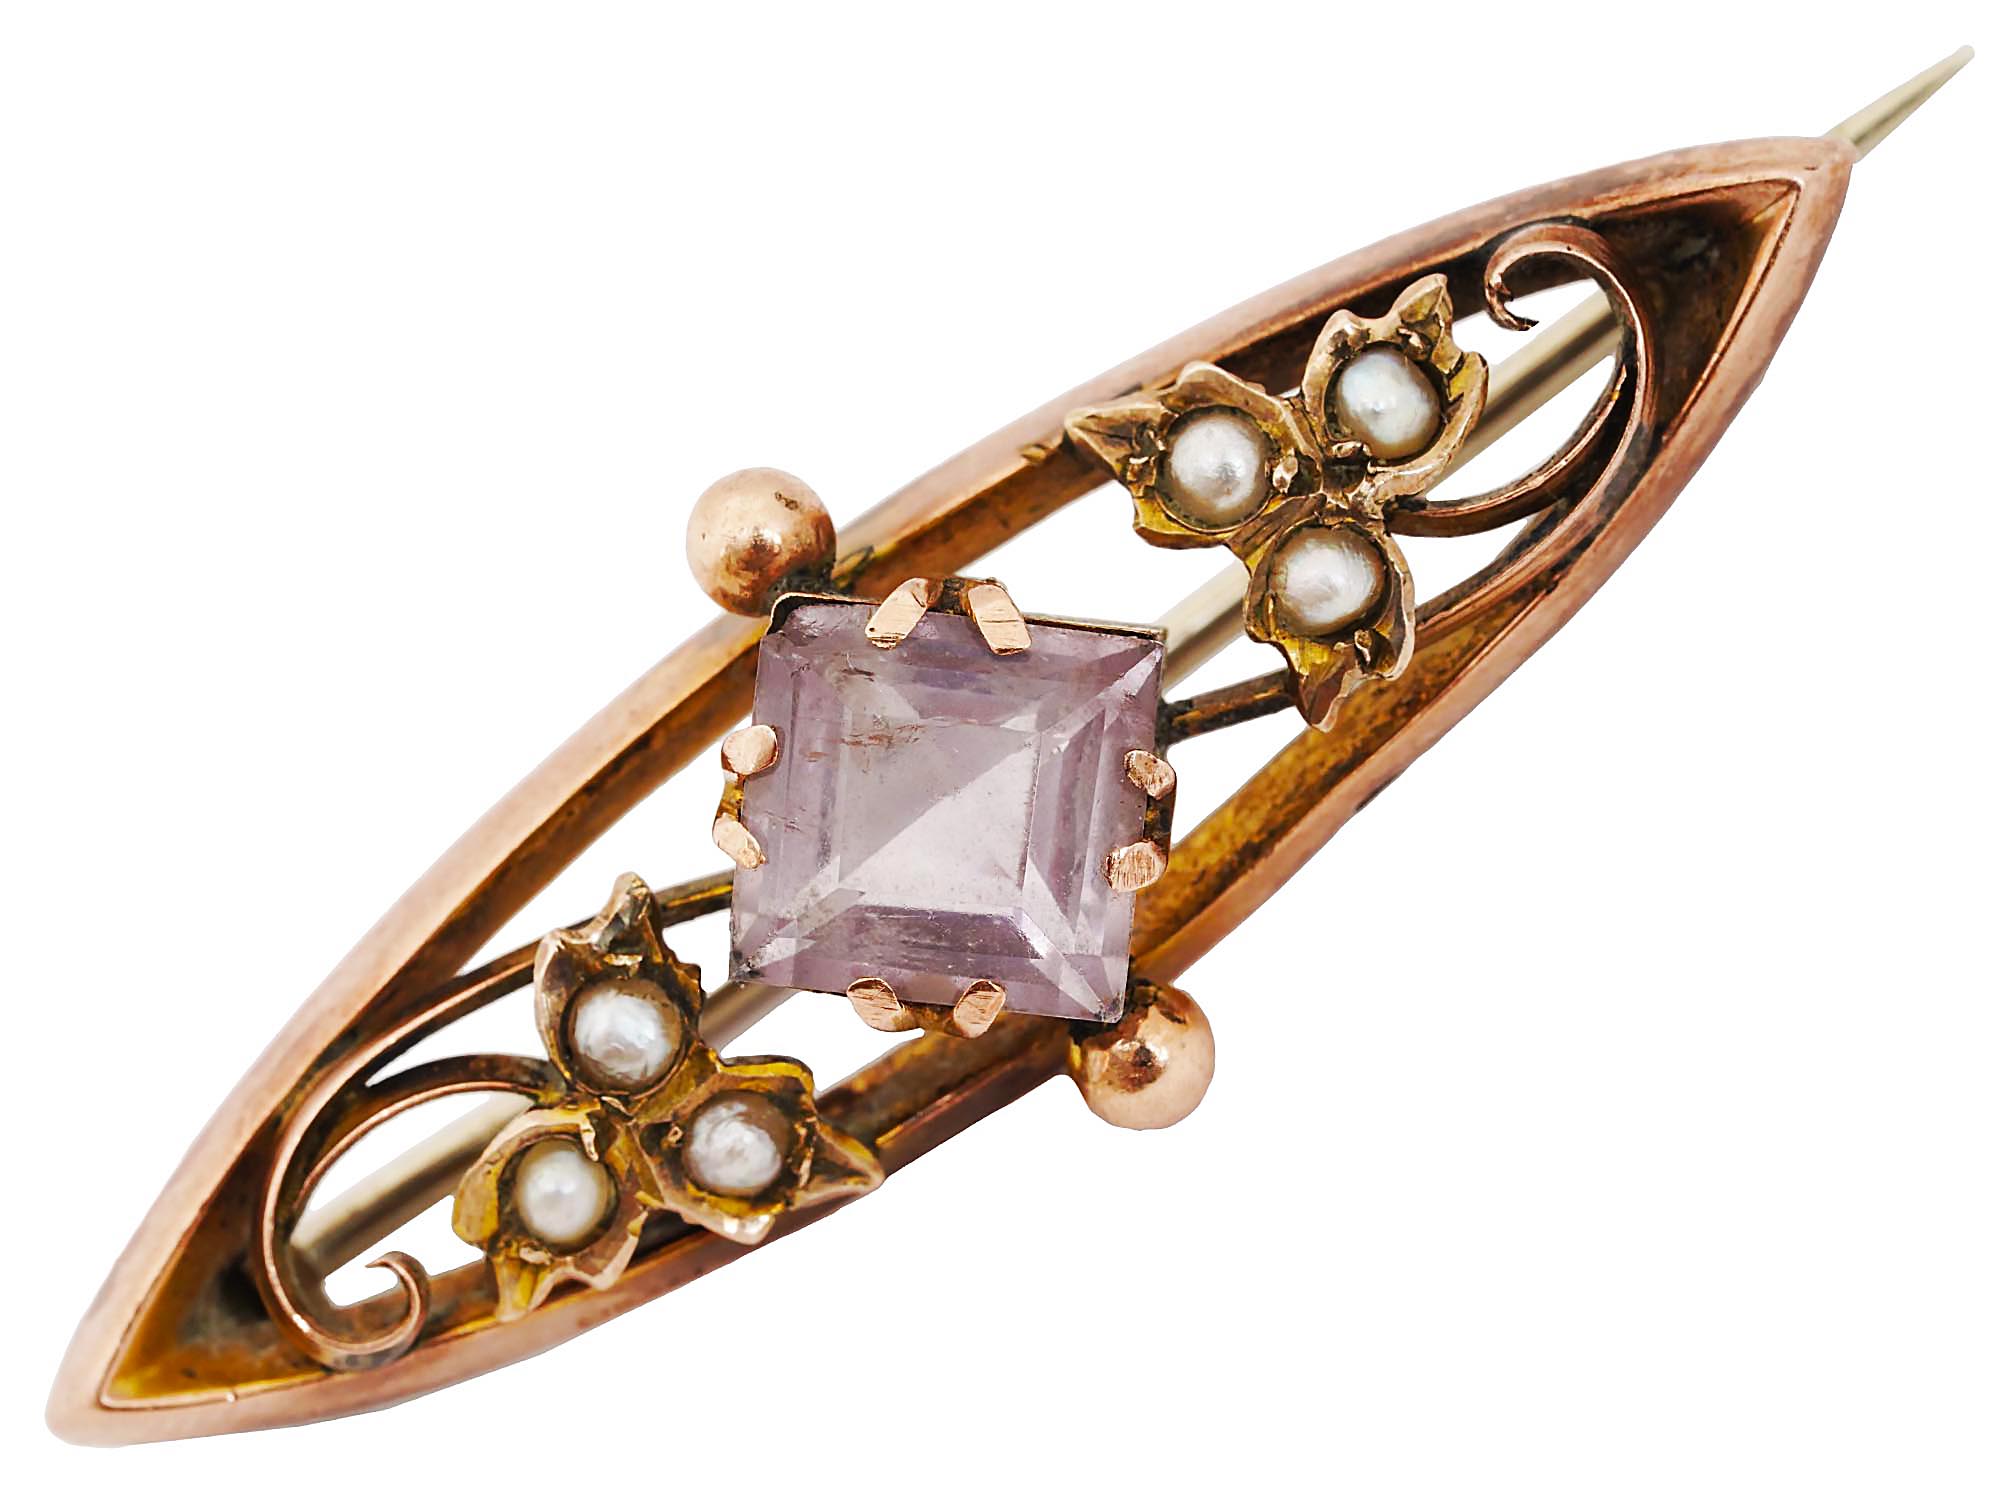 ANTIQUE ENGLISH 9K GOLD AMETHYST AND PEARLS PIN PIC-0